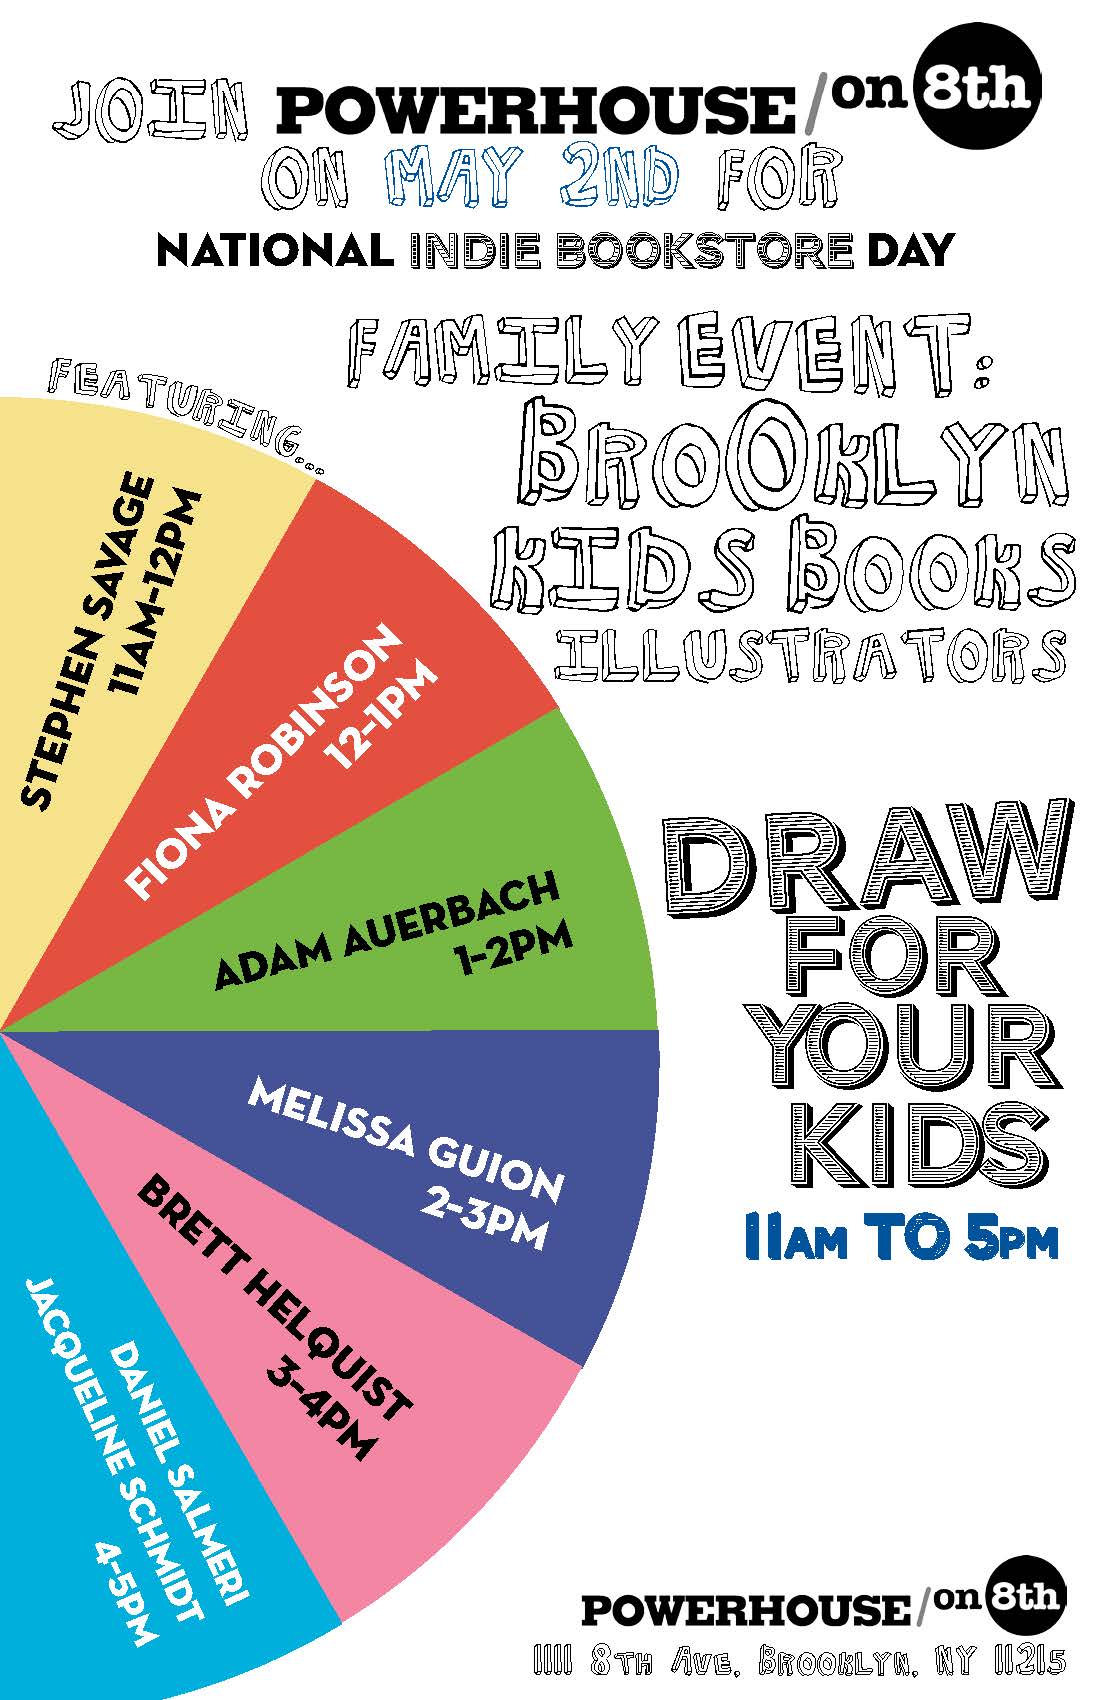  POWERHOUSE on 8th Family Event and May 2nd Indie Bookstore Day: Brooklyn Kids Book Illustrators Draw for your Kids